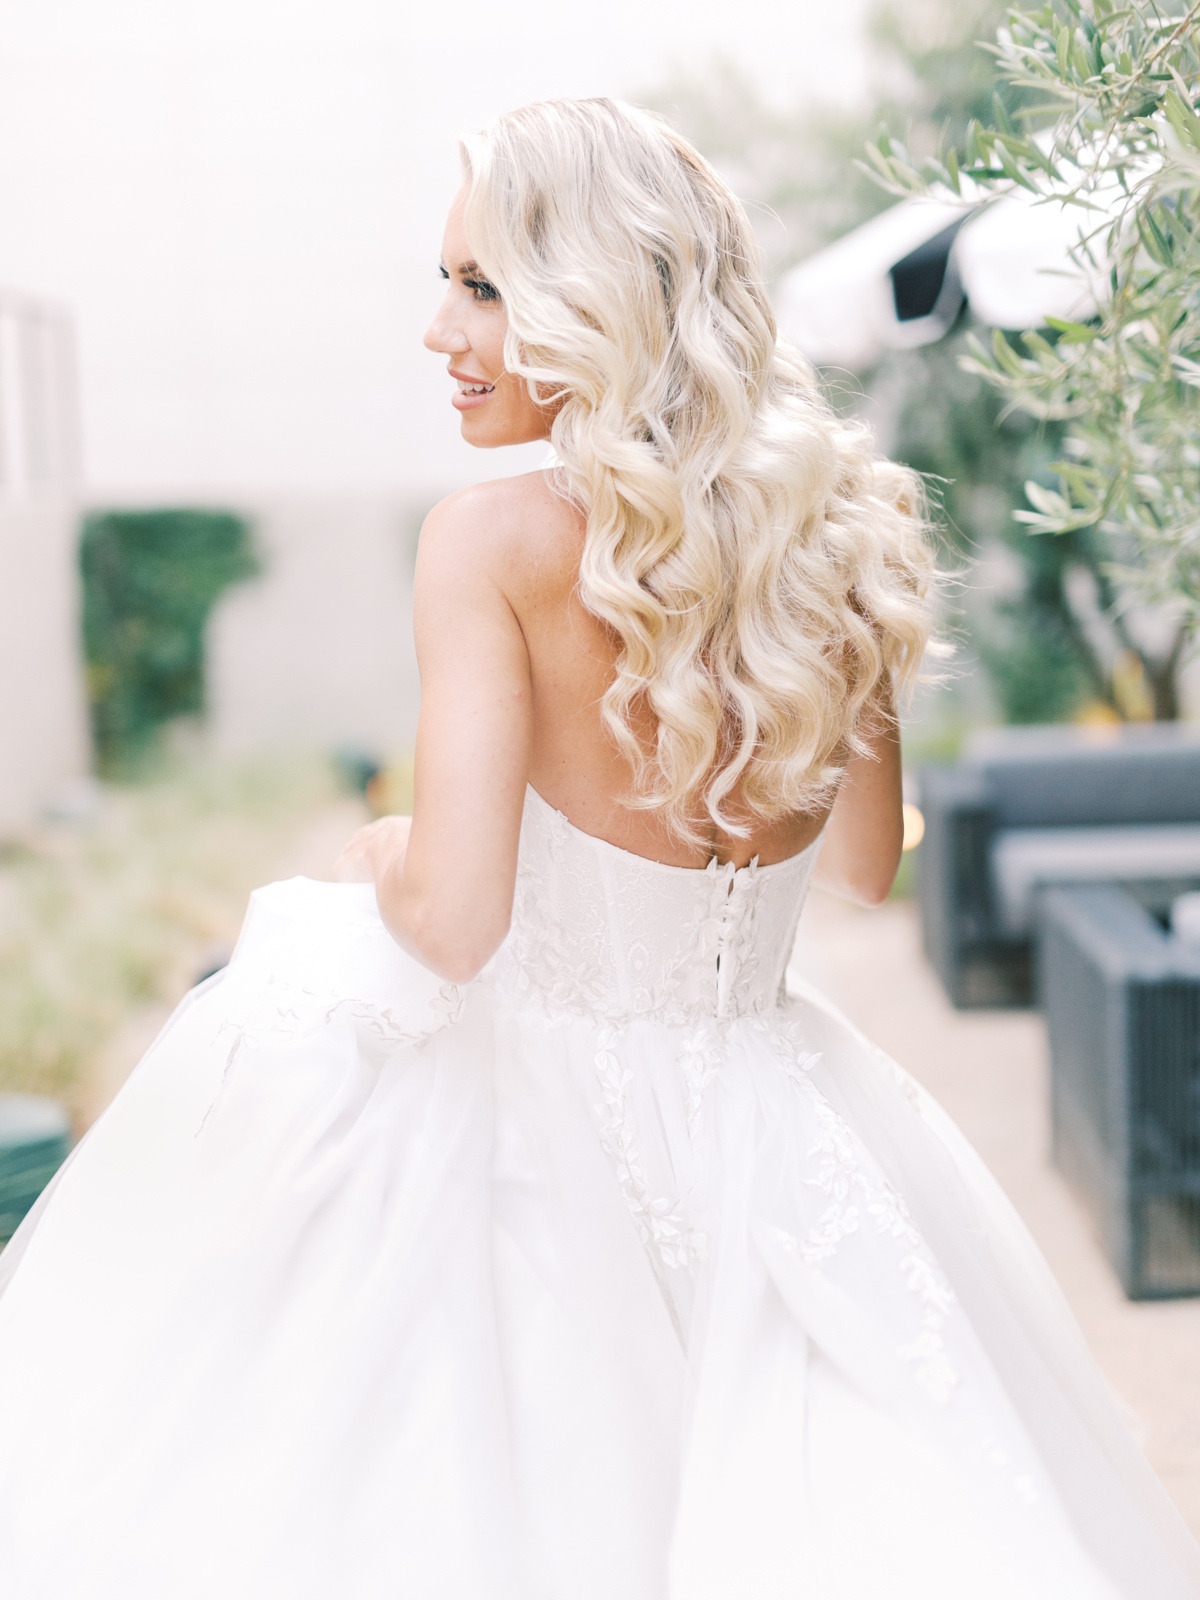 Beautiful bridal hair inspiration at The Guild Hotel San Diego wedding venue | Shot on film by Mandy Ford Photography